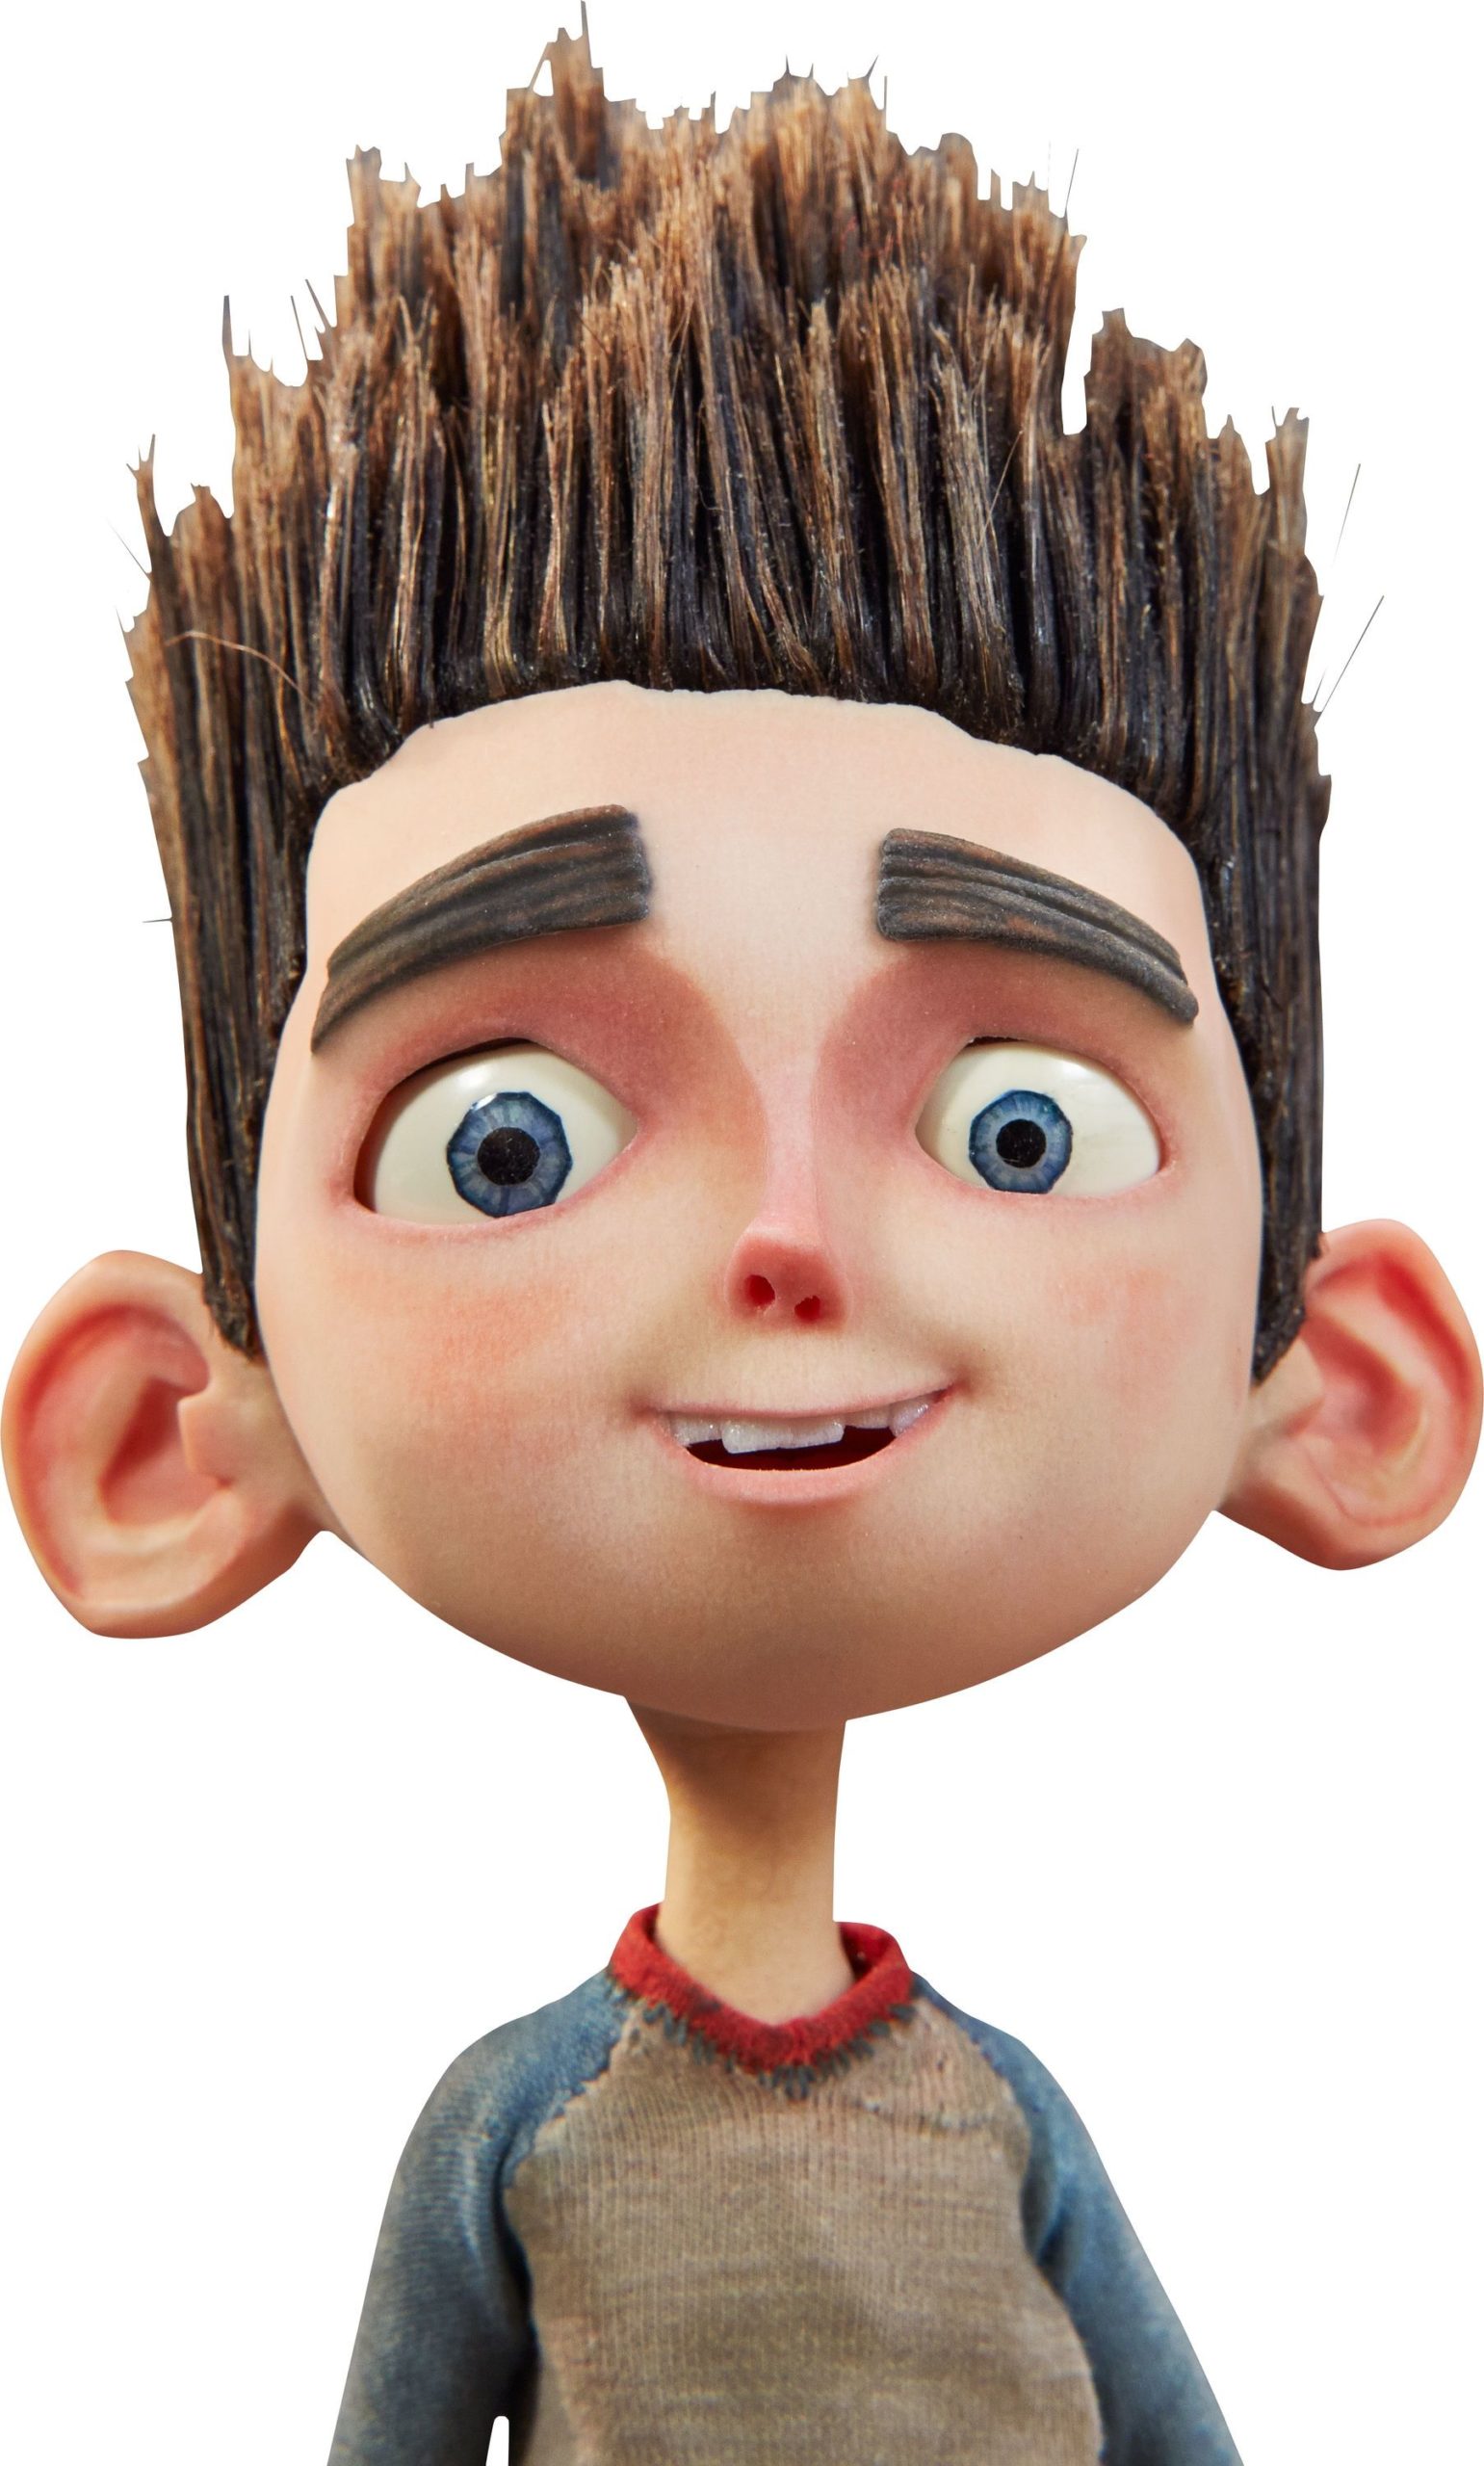 norman 2 scaled Critique of "ParaNorman" by Sam Fell and Chris Butler : Funny or scary ?